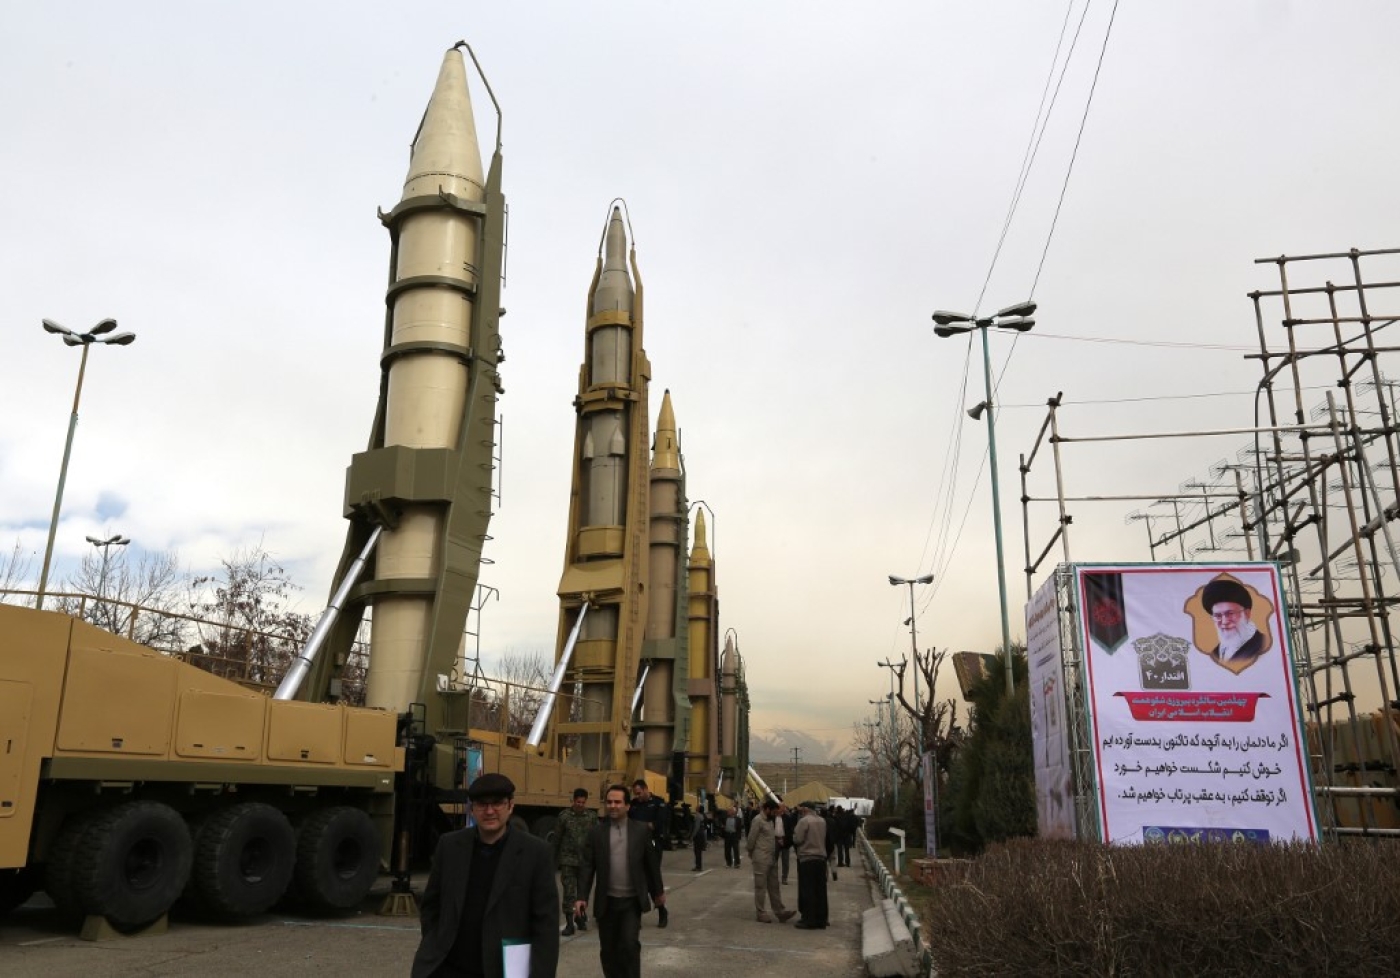 Iranians visit a weaponry and military equipment exhibition in the capital Tehran in February 2019.